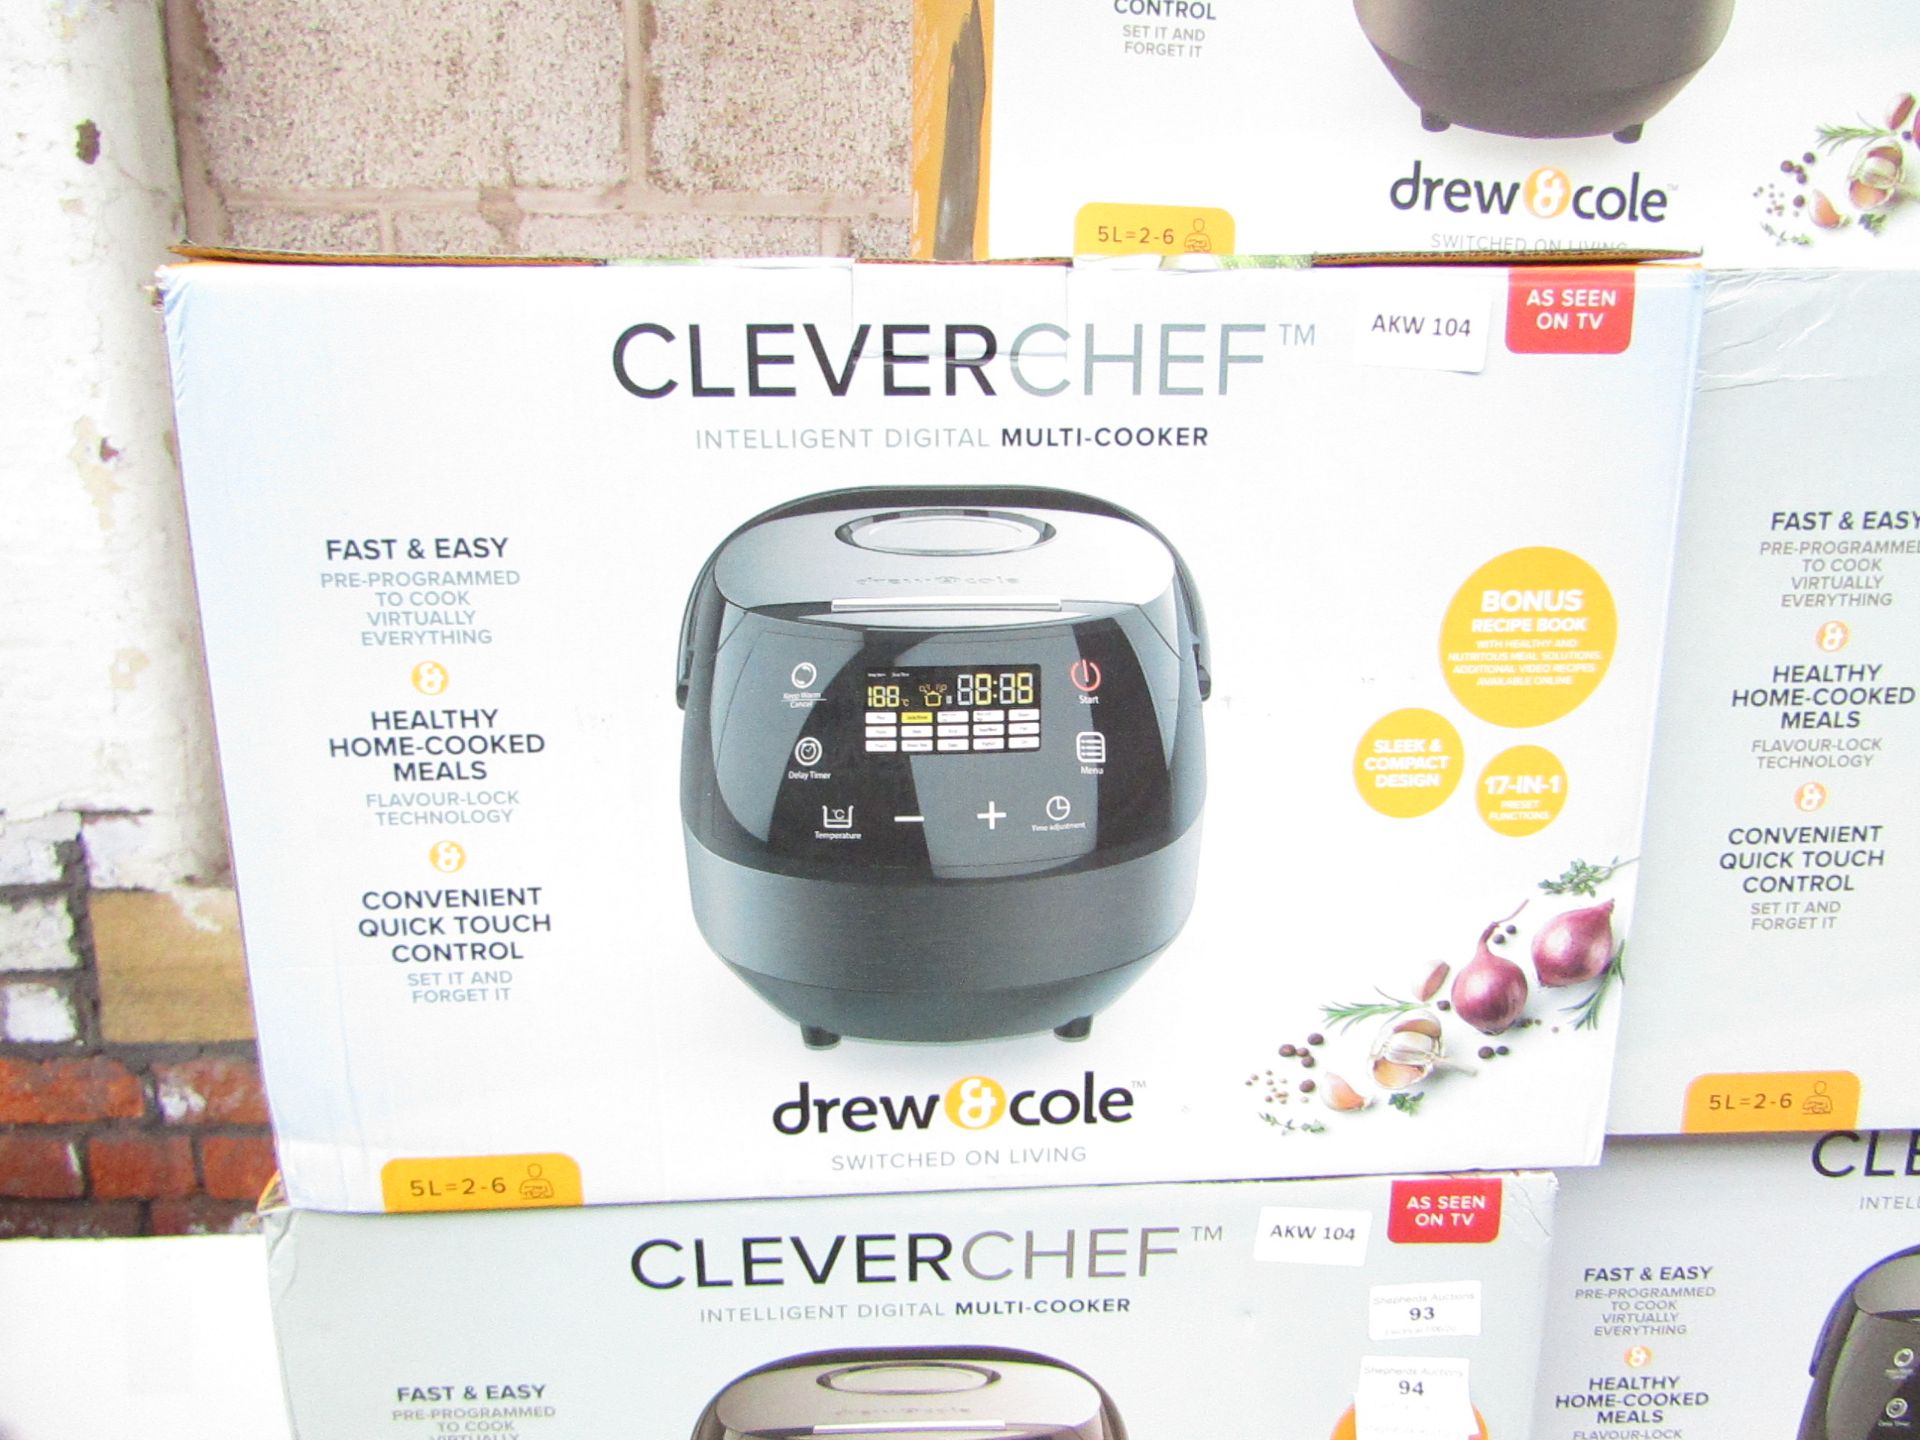 | 1X | DREW & COLE CLEVERCHEF | WE HAVE SPOT CHECKED A FEW OF THESE ITEMS ON THE SAME PALLET AND ALL